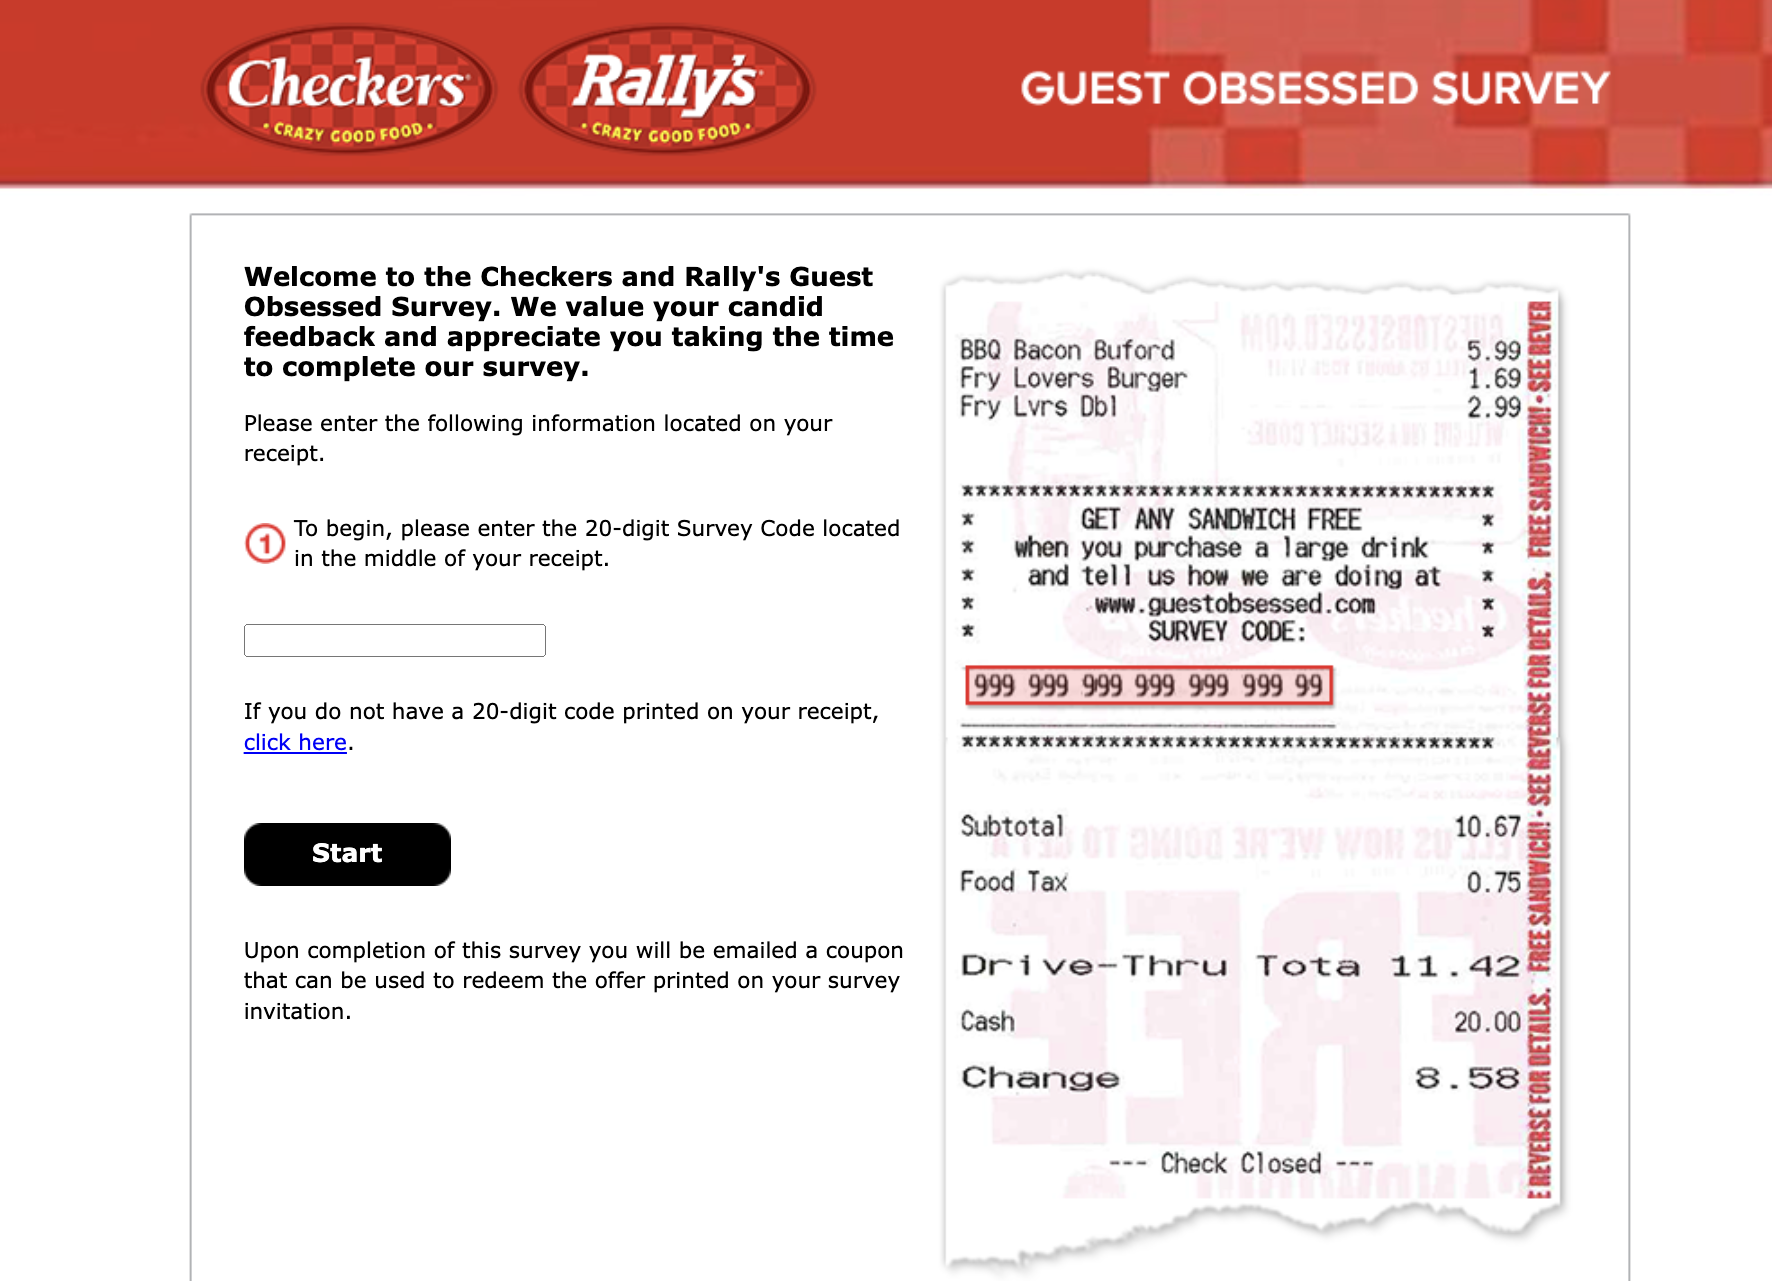 Guestobsessed Survey - FREE Coupon Checkers & Rally's